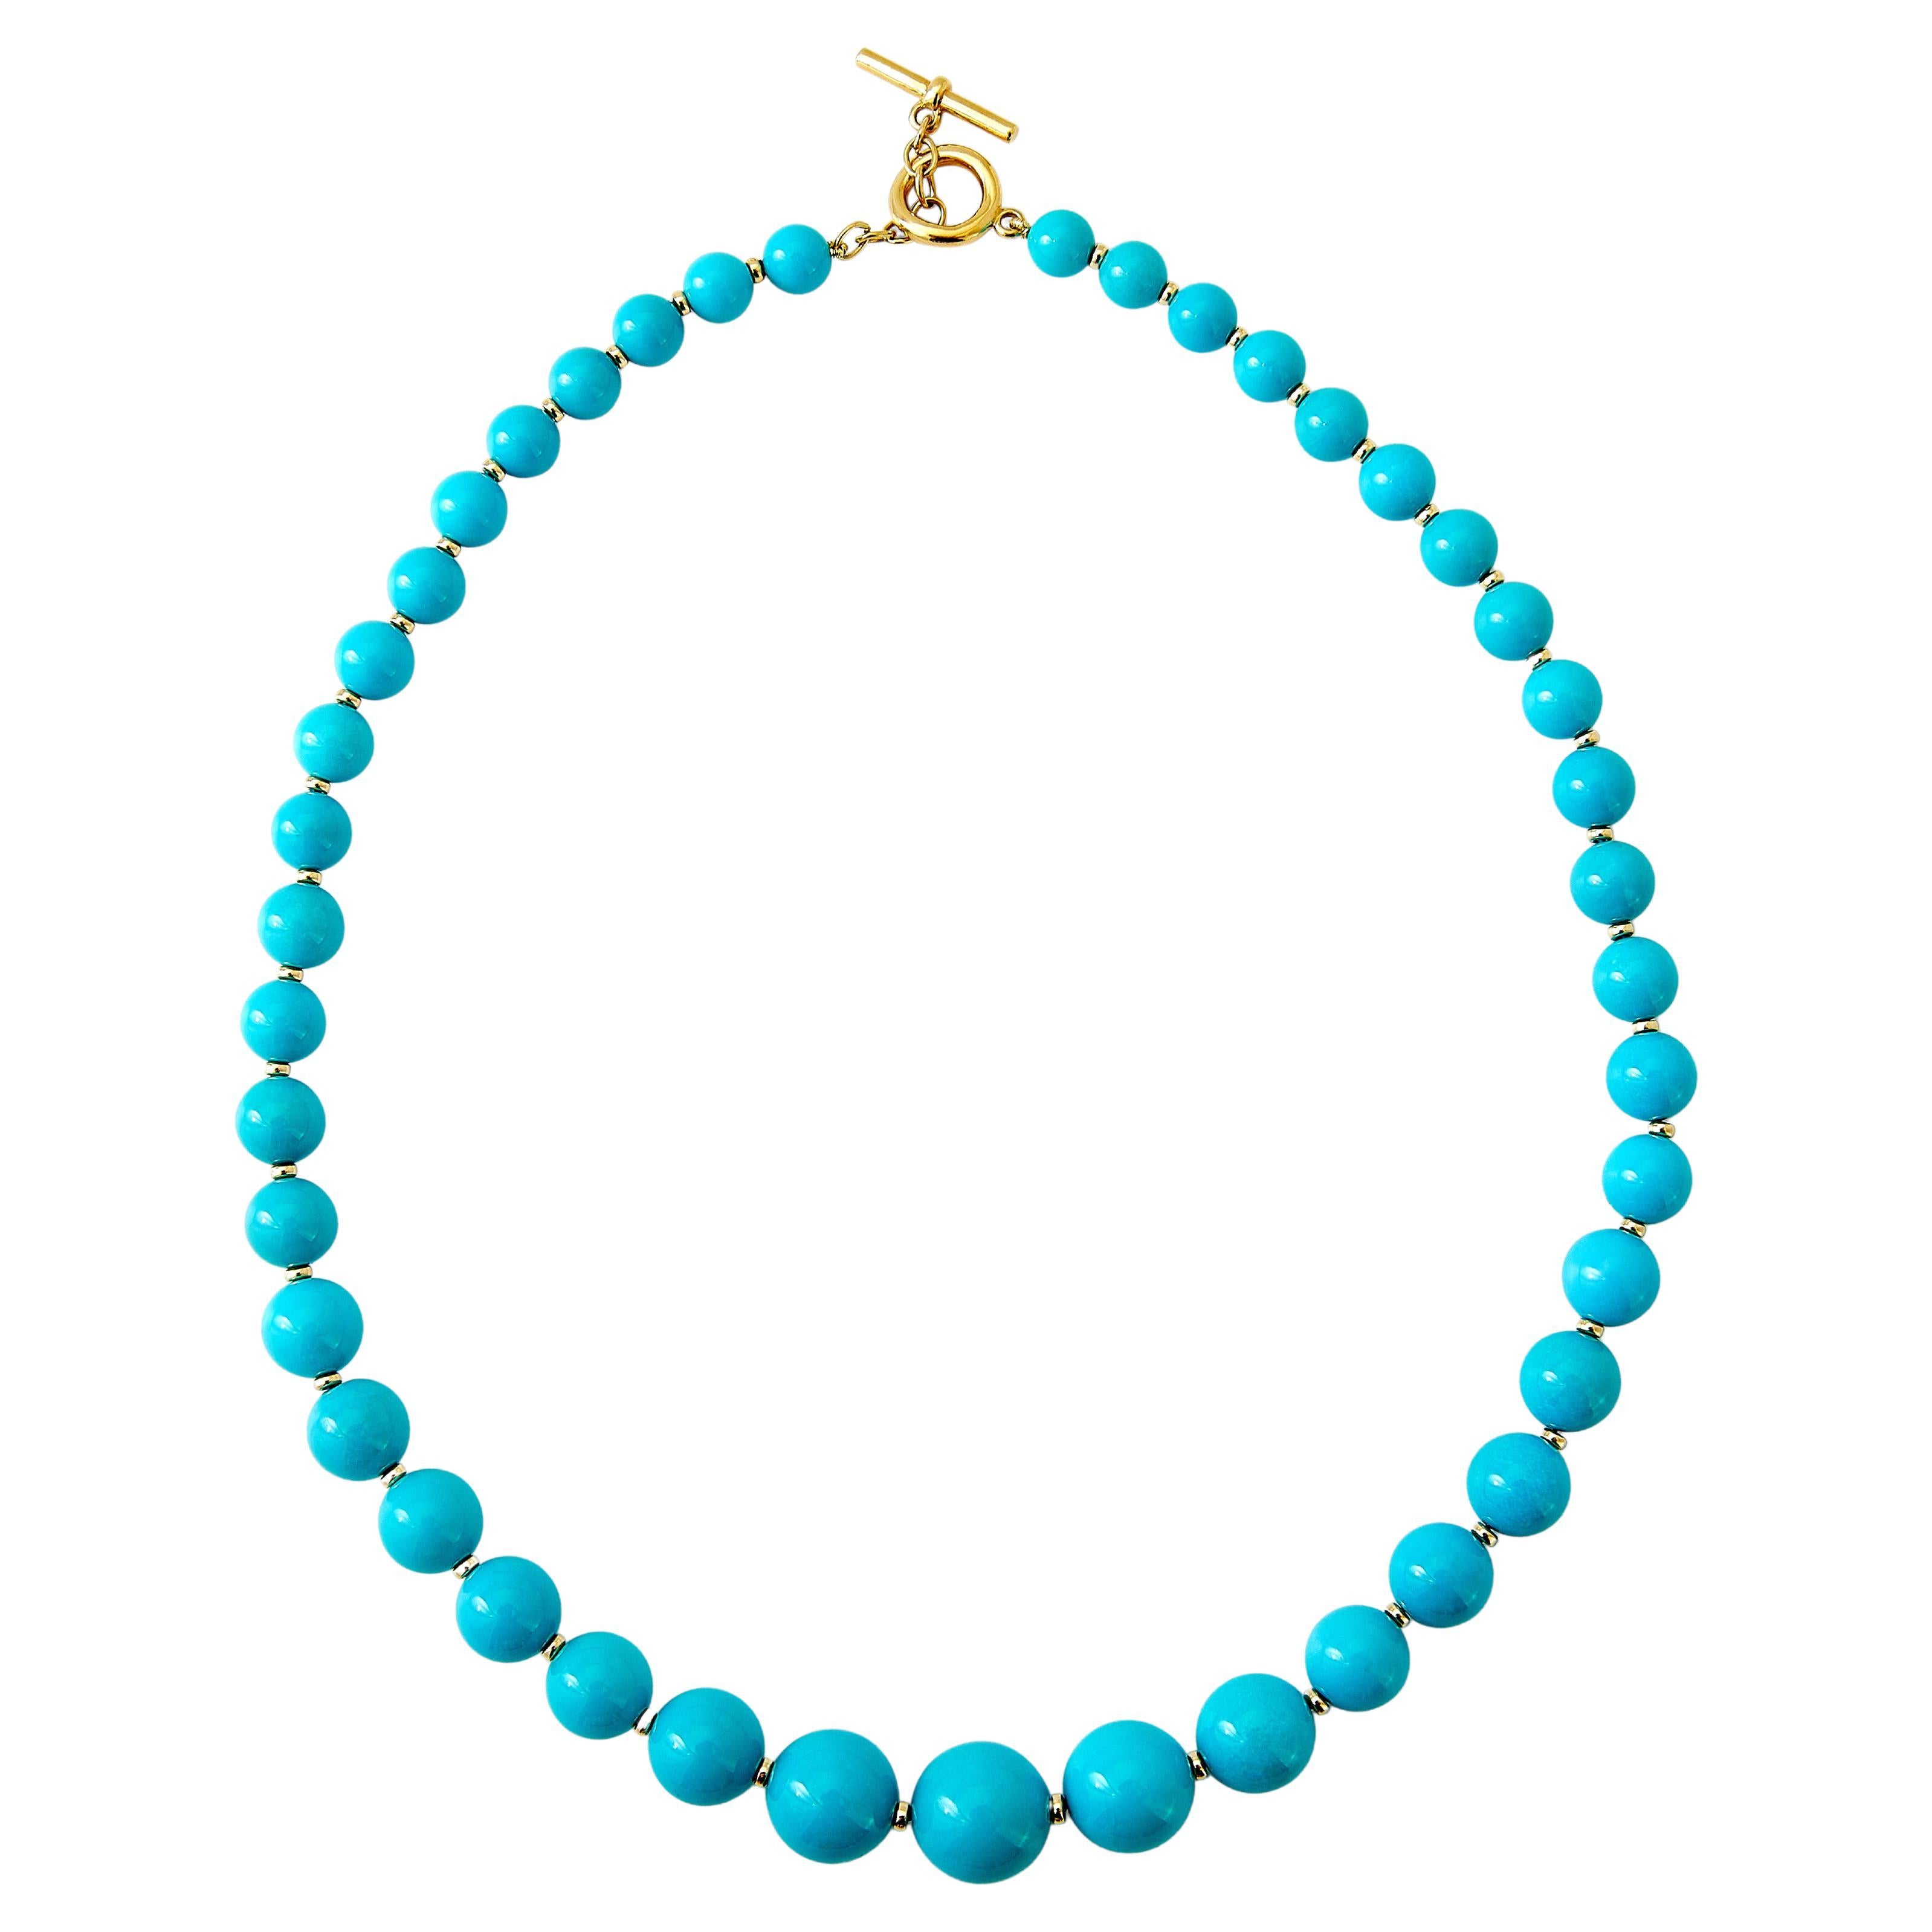 Syna Yellow Gold Sleeping Beauty Turquoise Graduating Bead Necklace